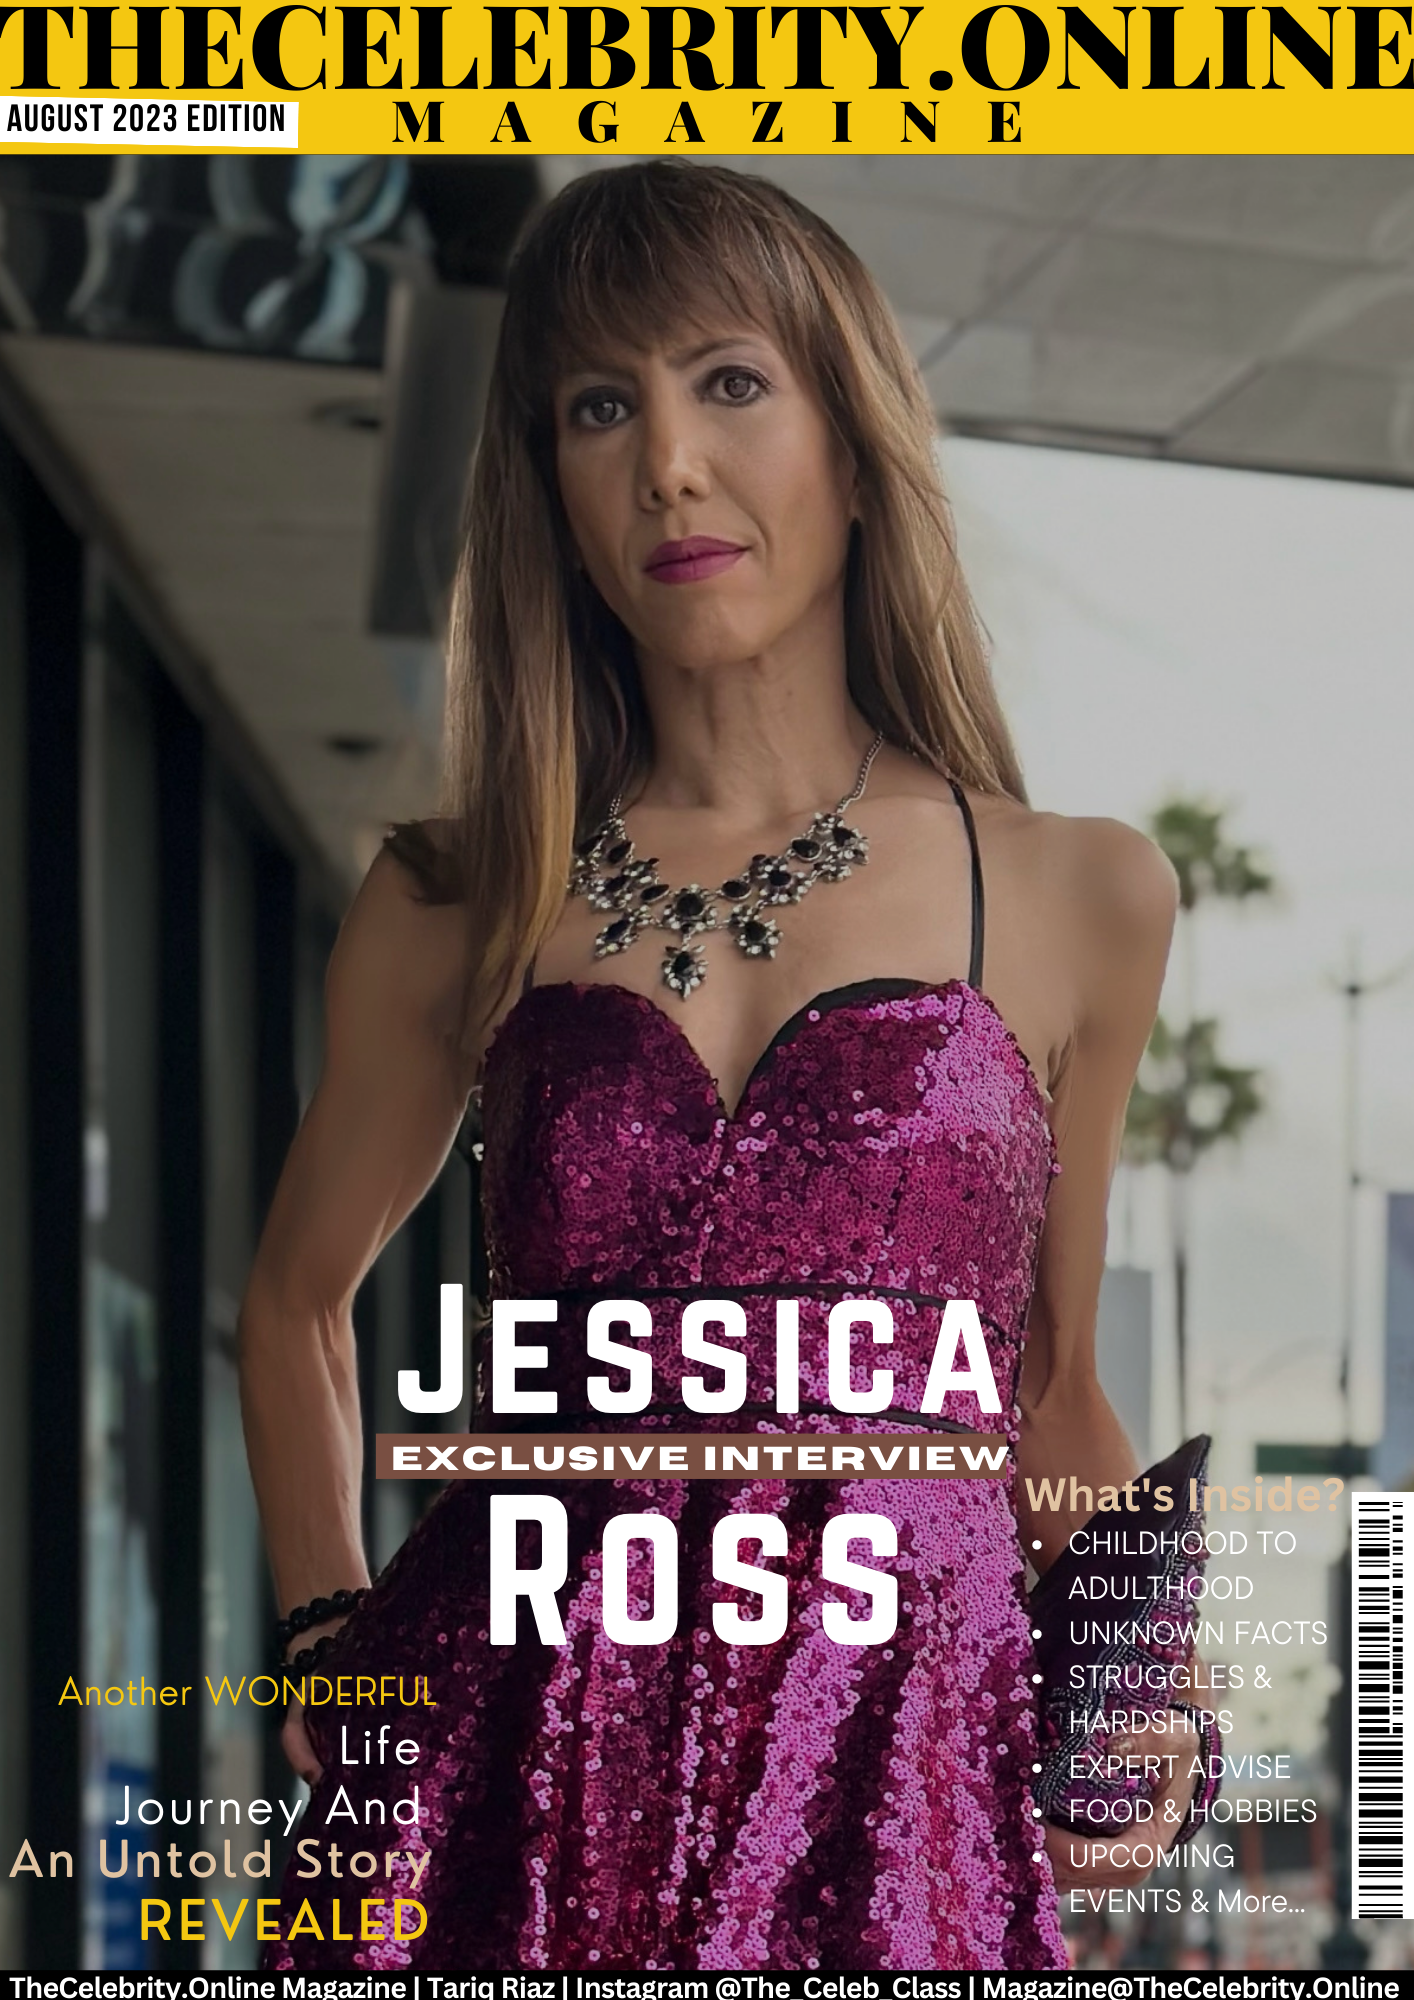 Jessica Ross Exclusive Interview – ‘Don’t Let Anything Stand In The Way Of Your Dreams!’